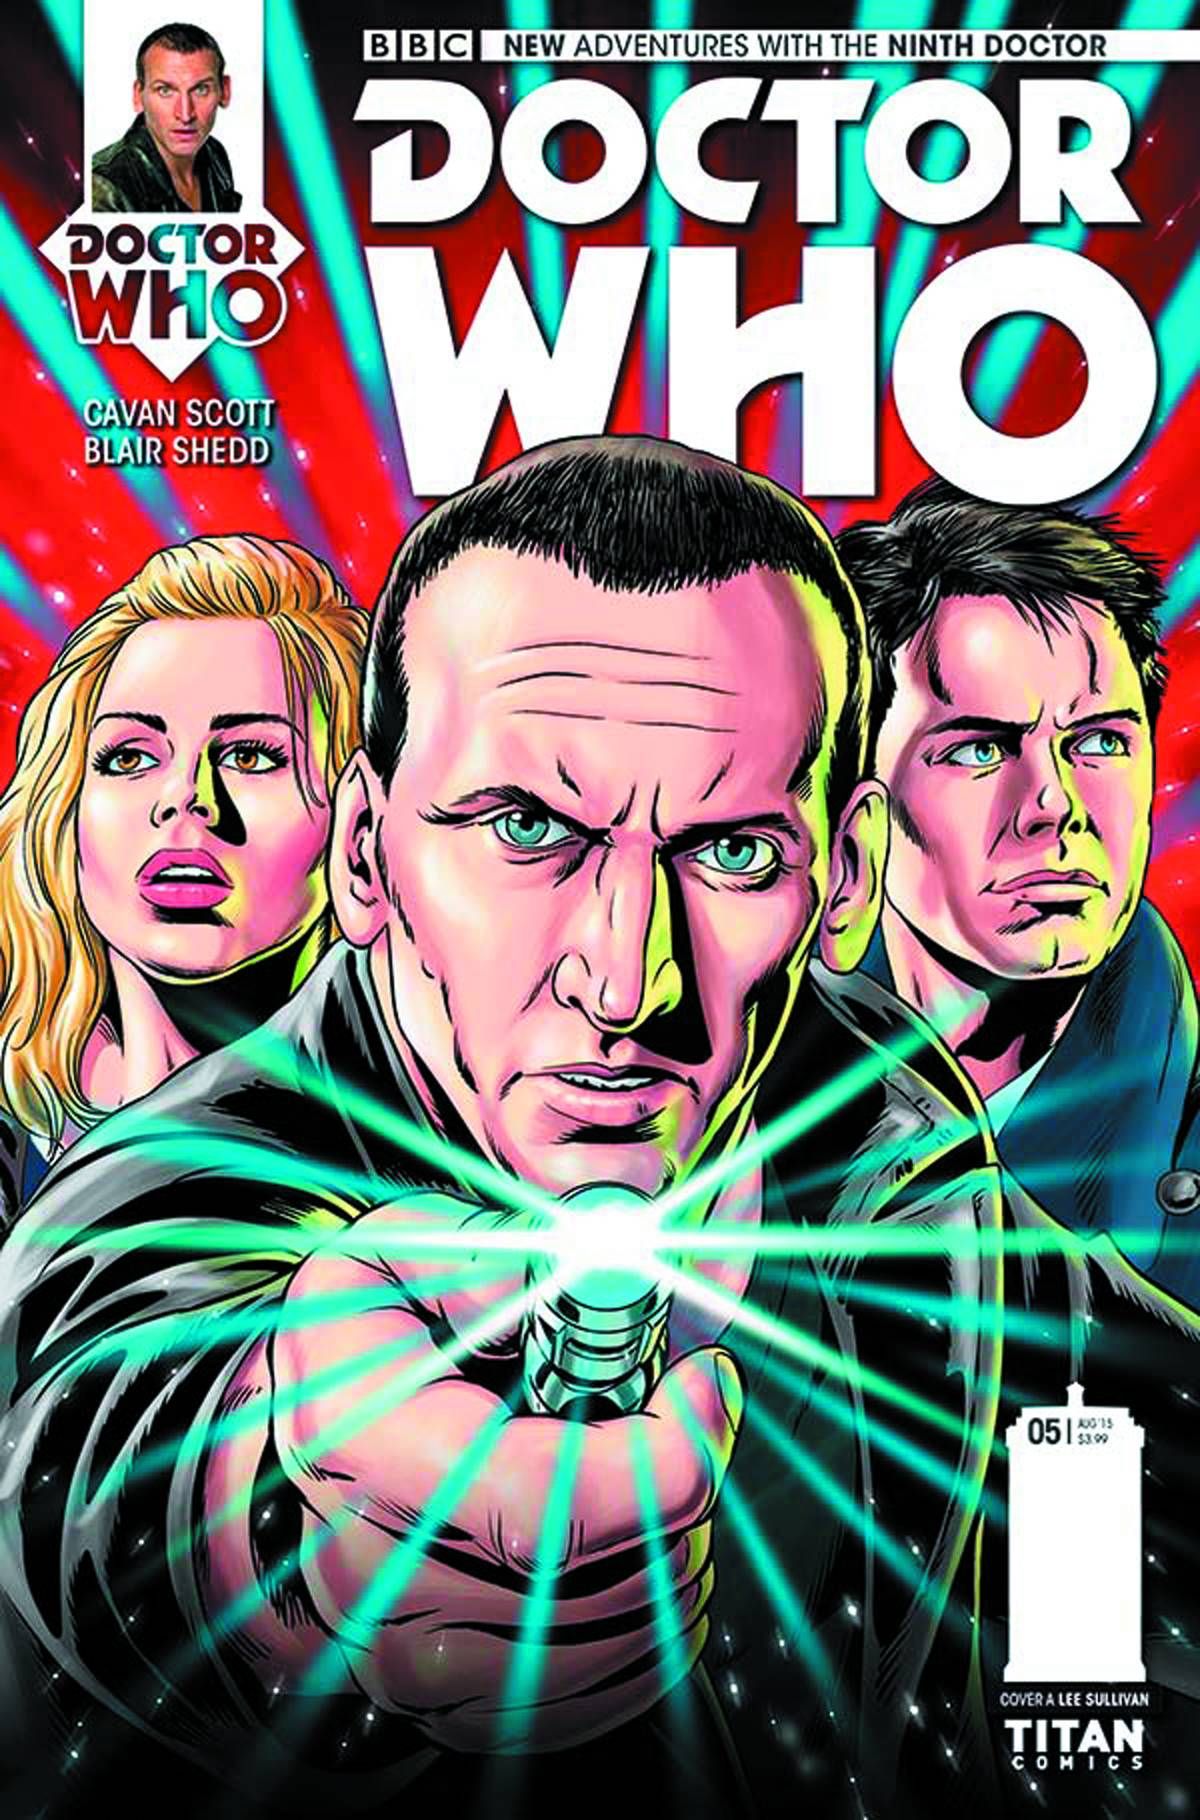 Doctor Who: The Ninth Doctor #5 Comic